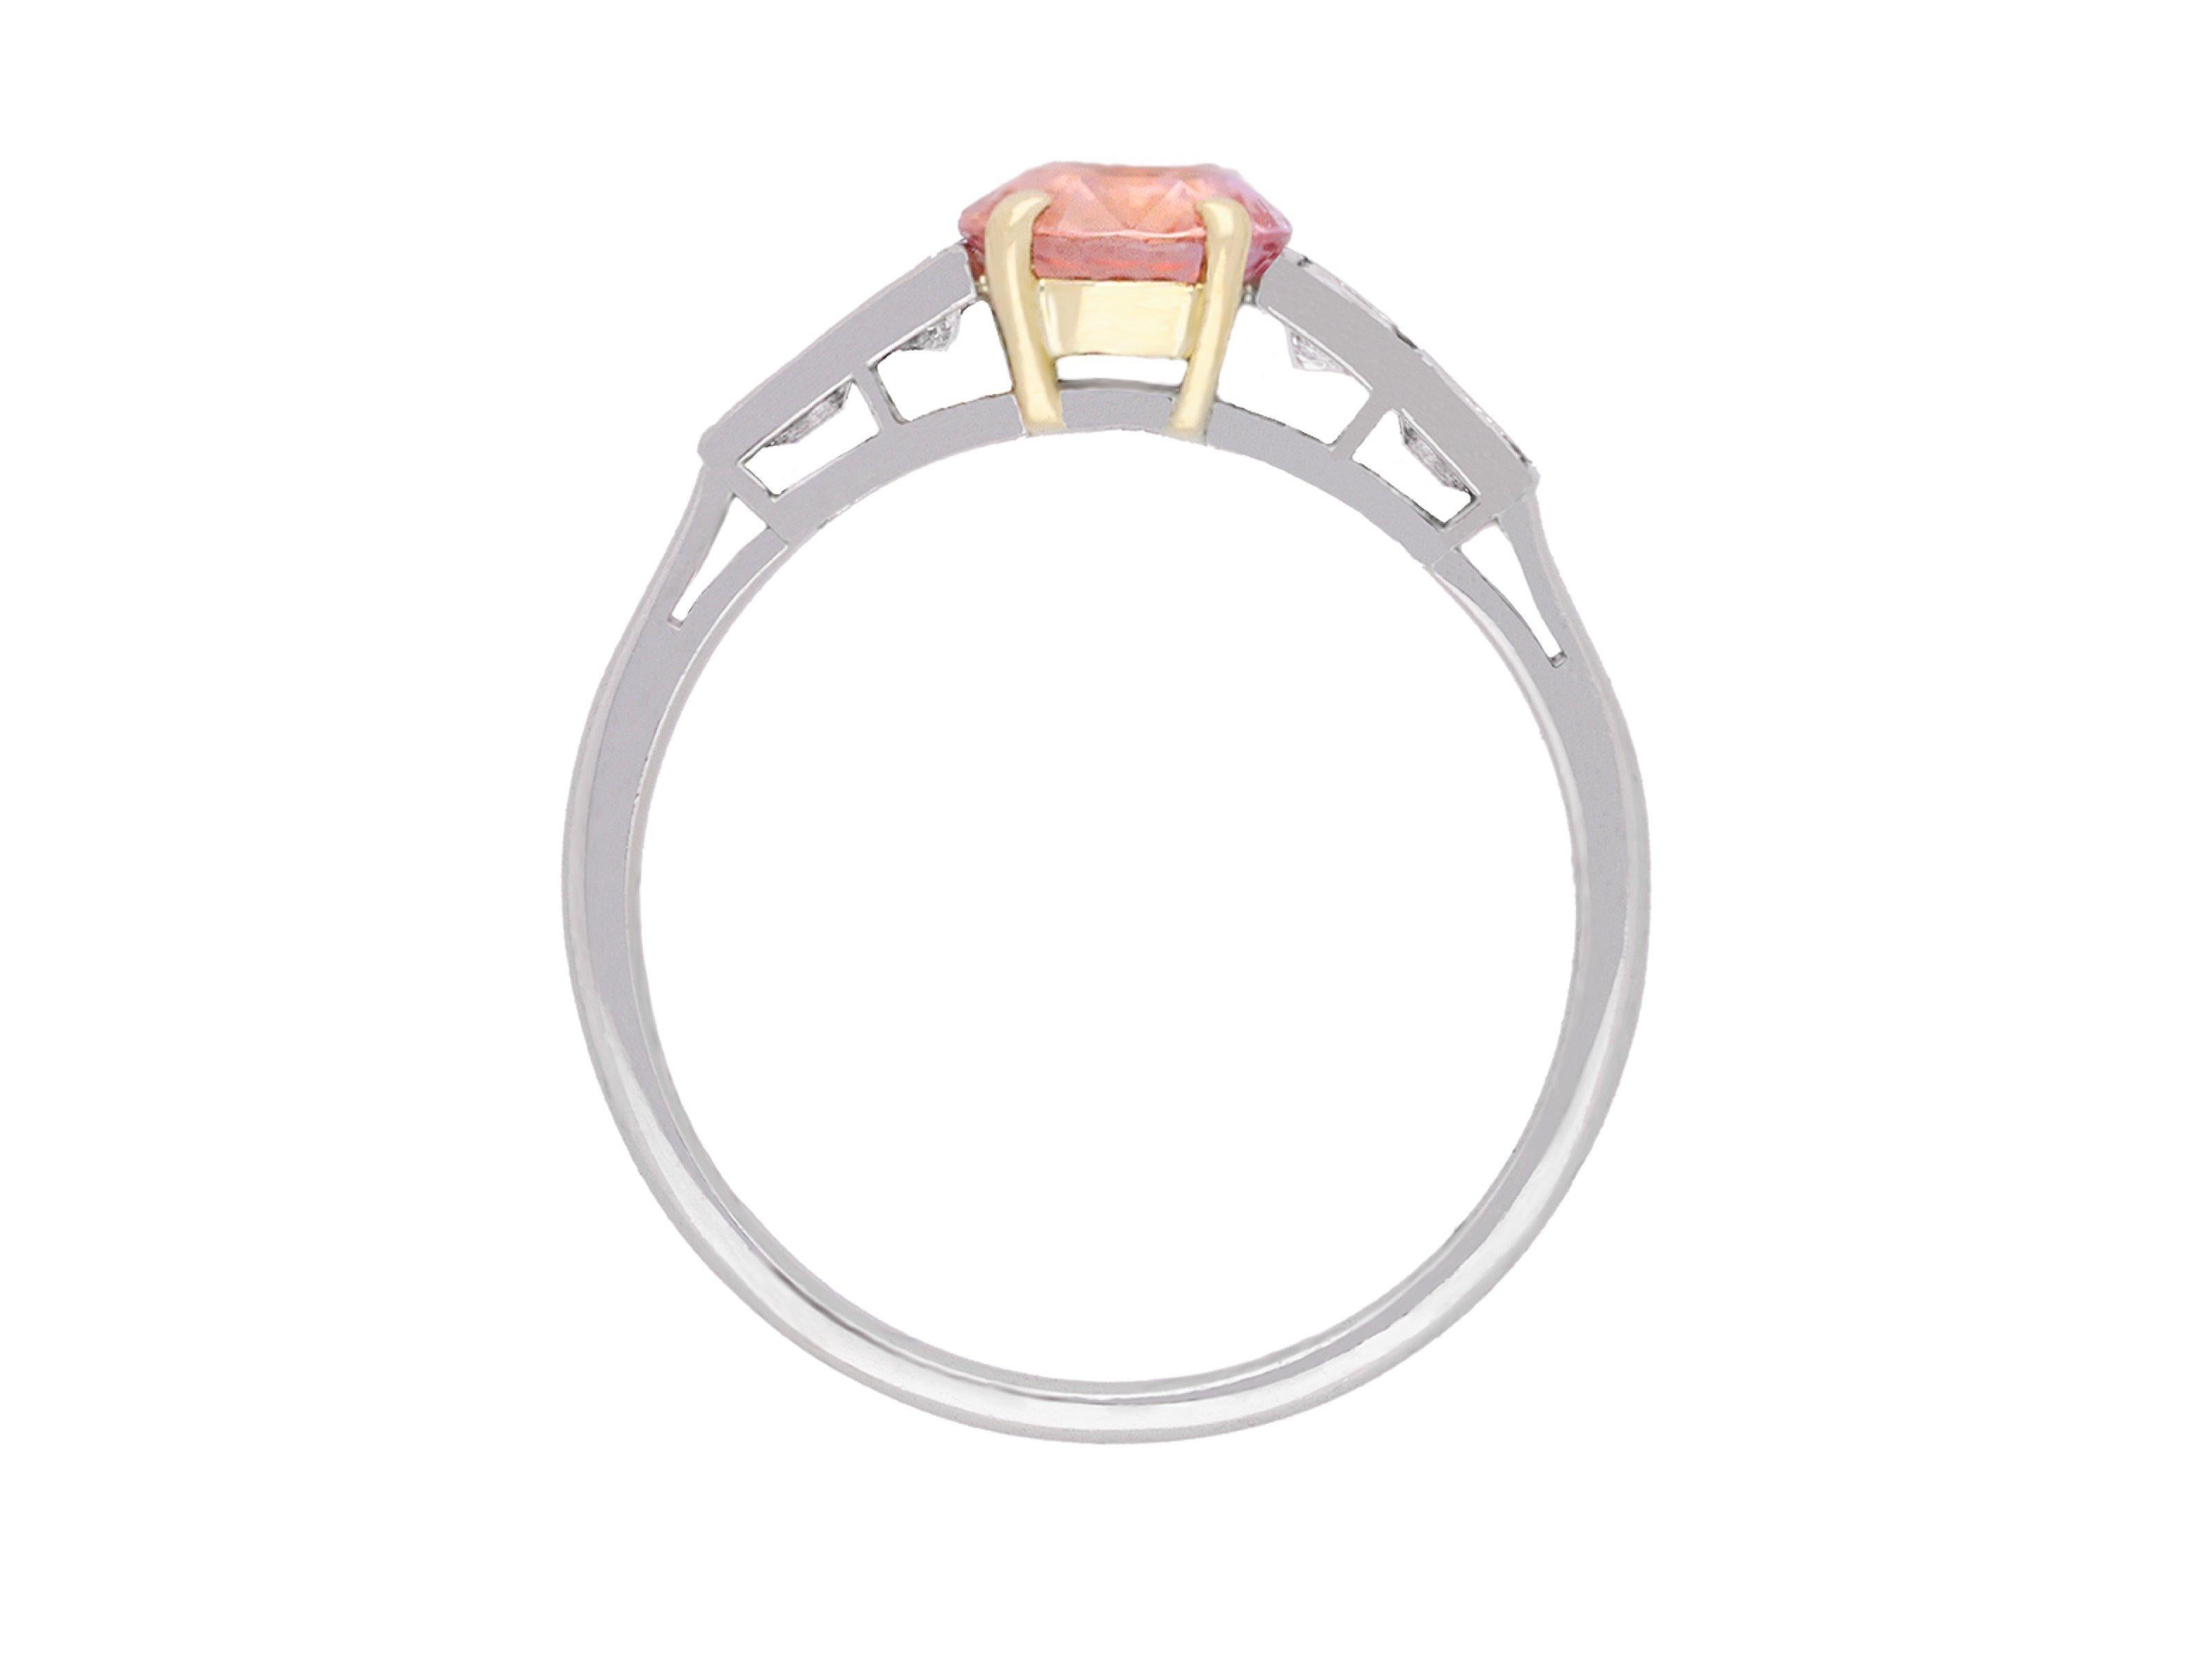 Padparadscha Ceylon sapphire and diamond ring. Set to centre with a cushion shape mixed cut natural unenhanced Padparadscha Ceylon sapphire in an open back claw setting with a weight of 1.18 carats, flanked by two tapering baguette cut diamonds in